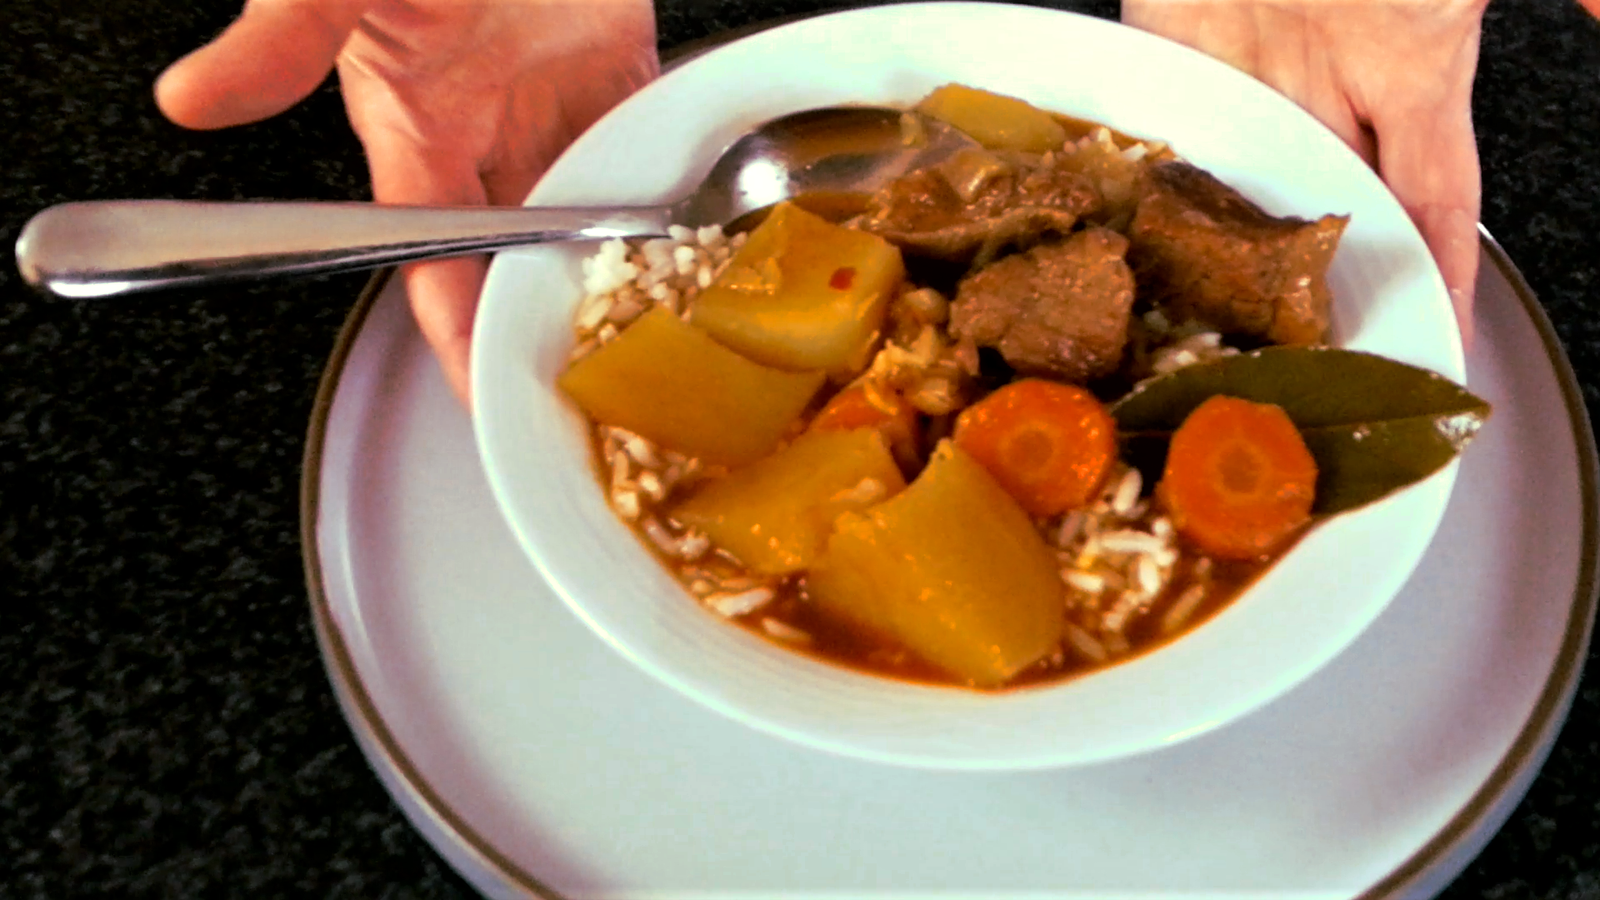 Beef Stew cooked in a pressure cooker